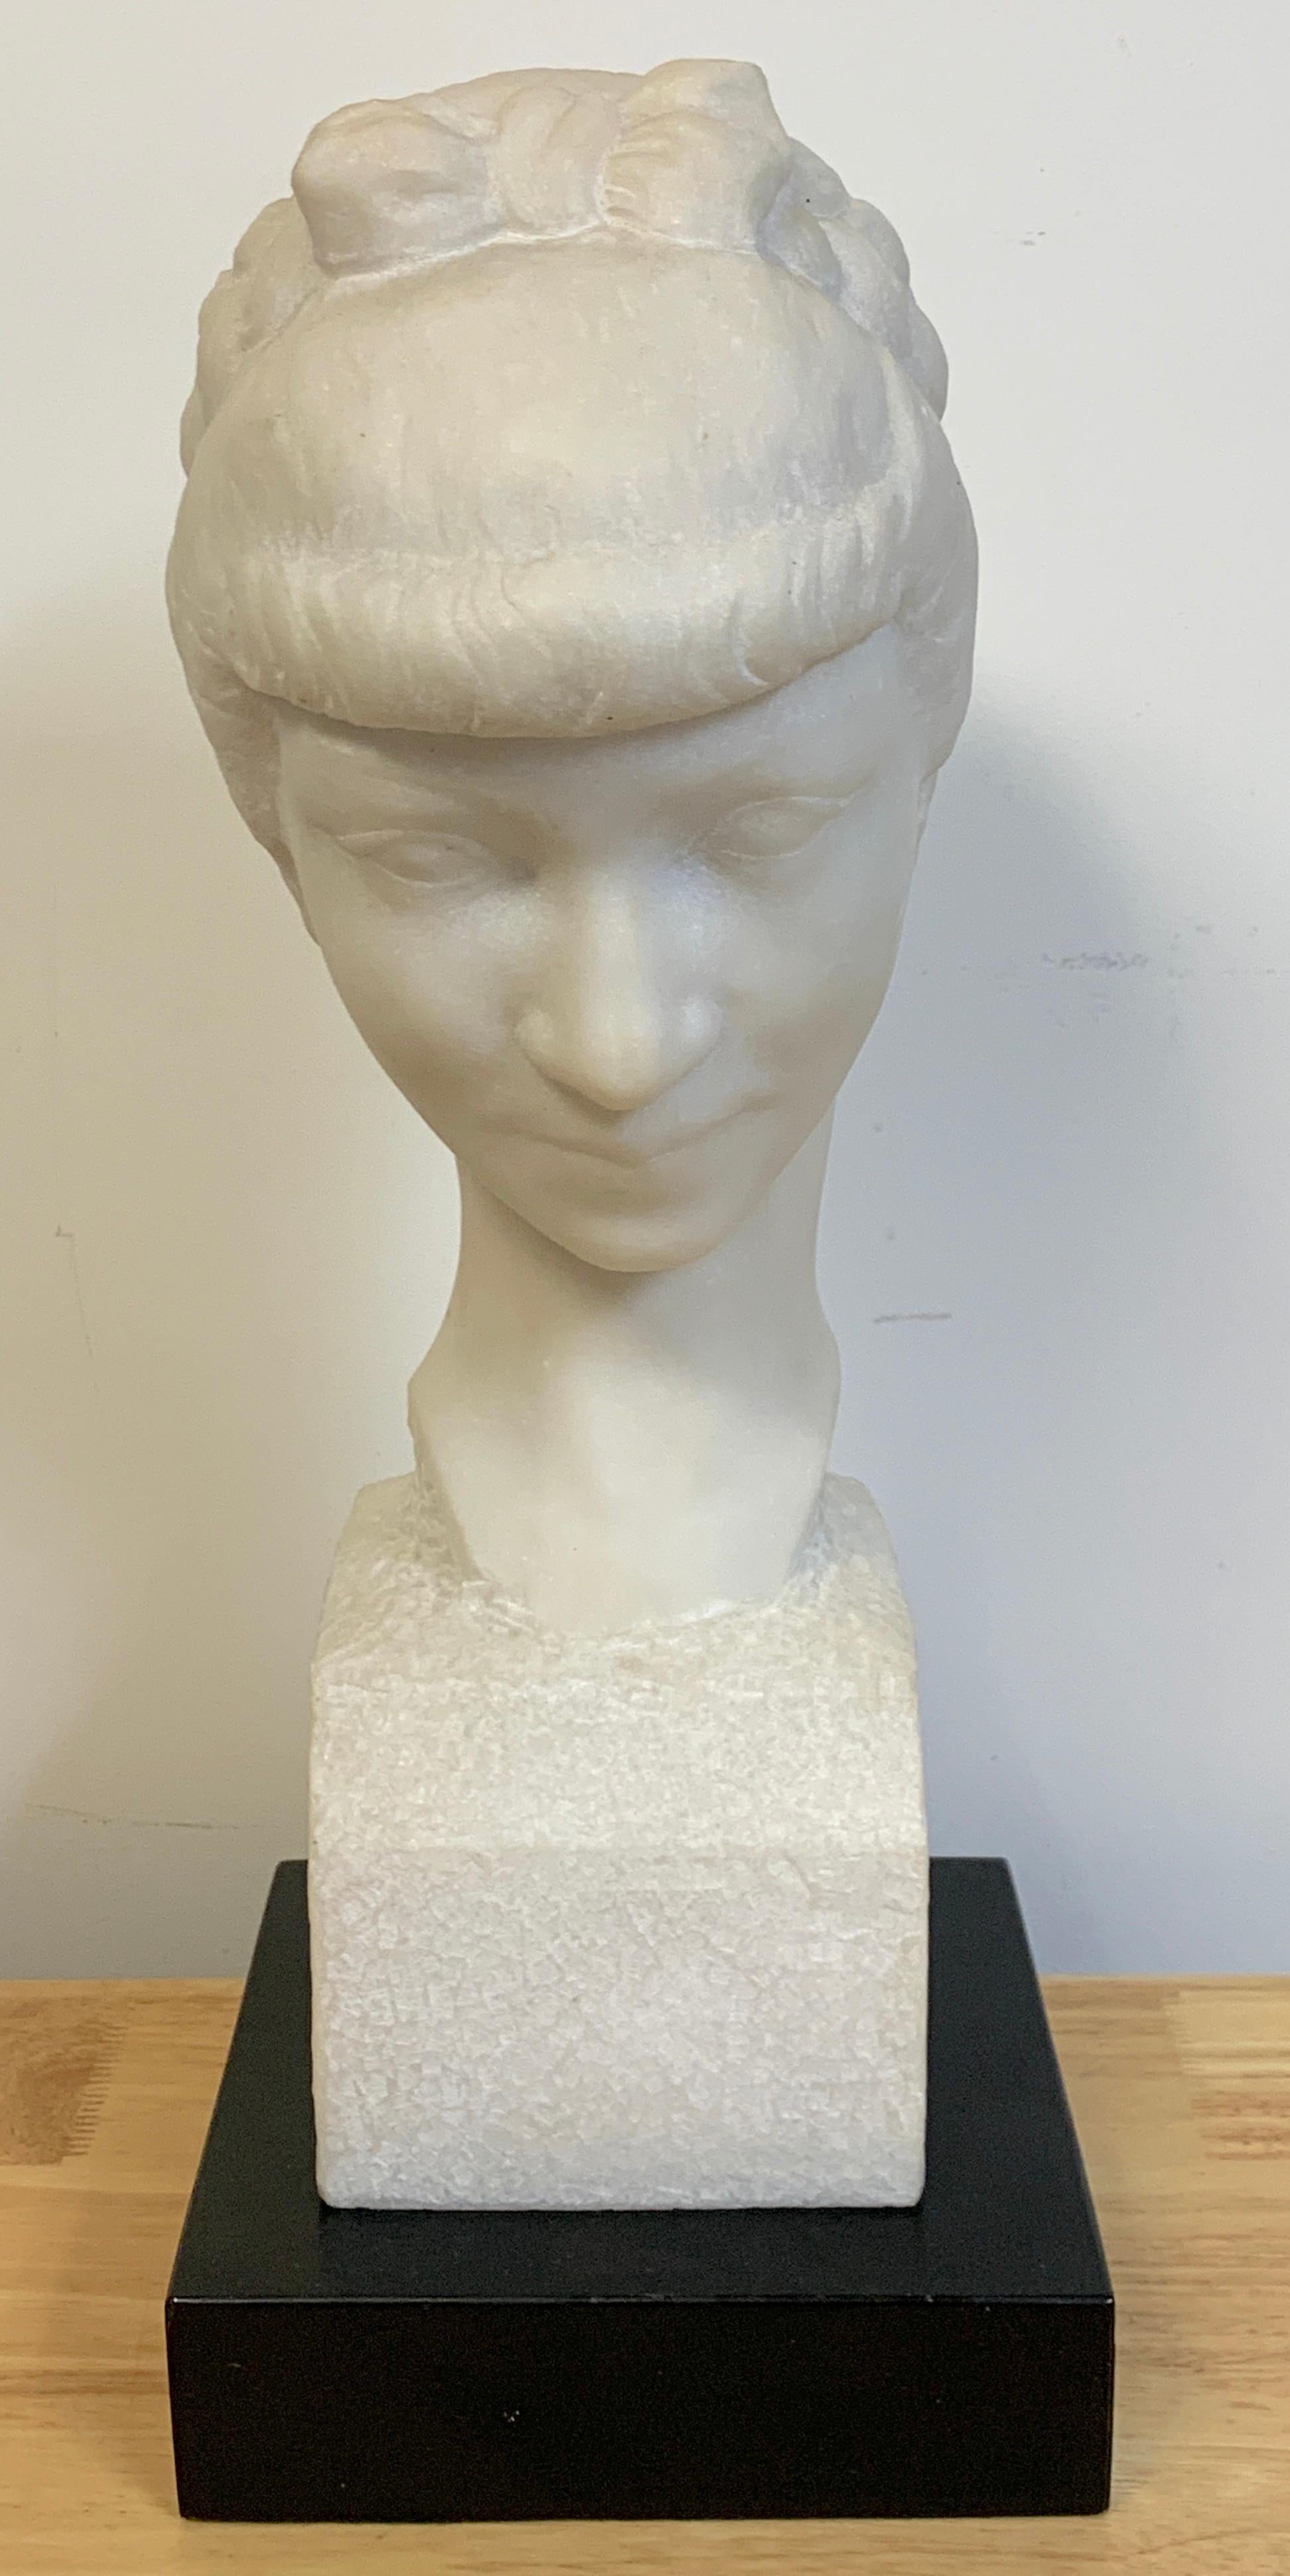 French modern marble portrait bust of a lady, by L. Cordonnier, '51 
A serene carved marble portrait bust of a young lady with braided hair looking downwards.
Signed L. Cordonnier, middle right
Included is a later ebonized wood plinth
Bust alone